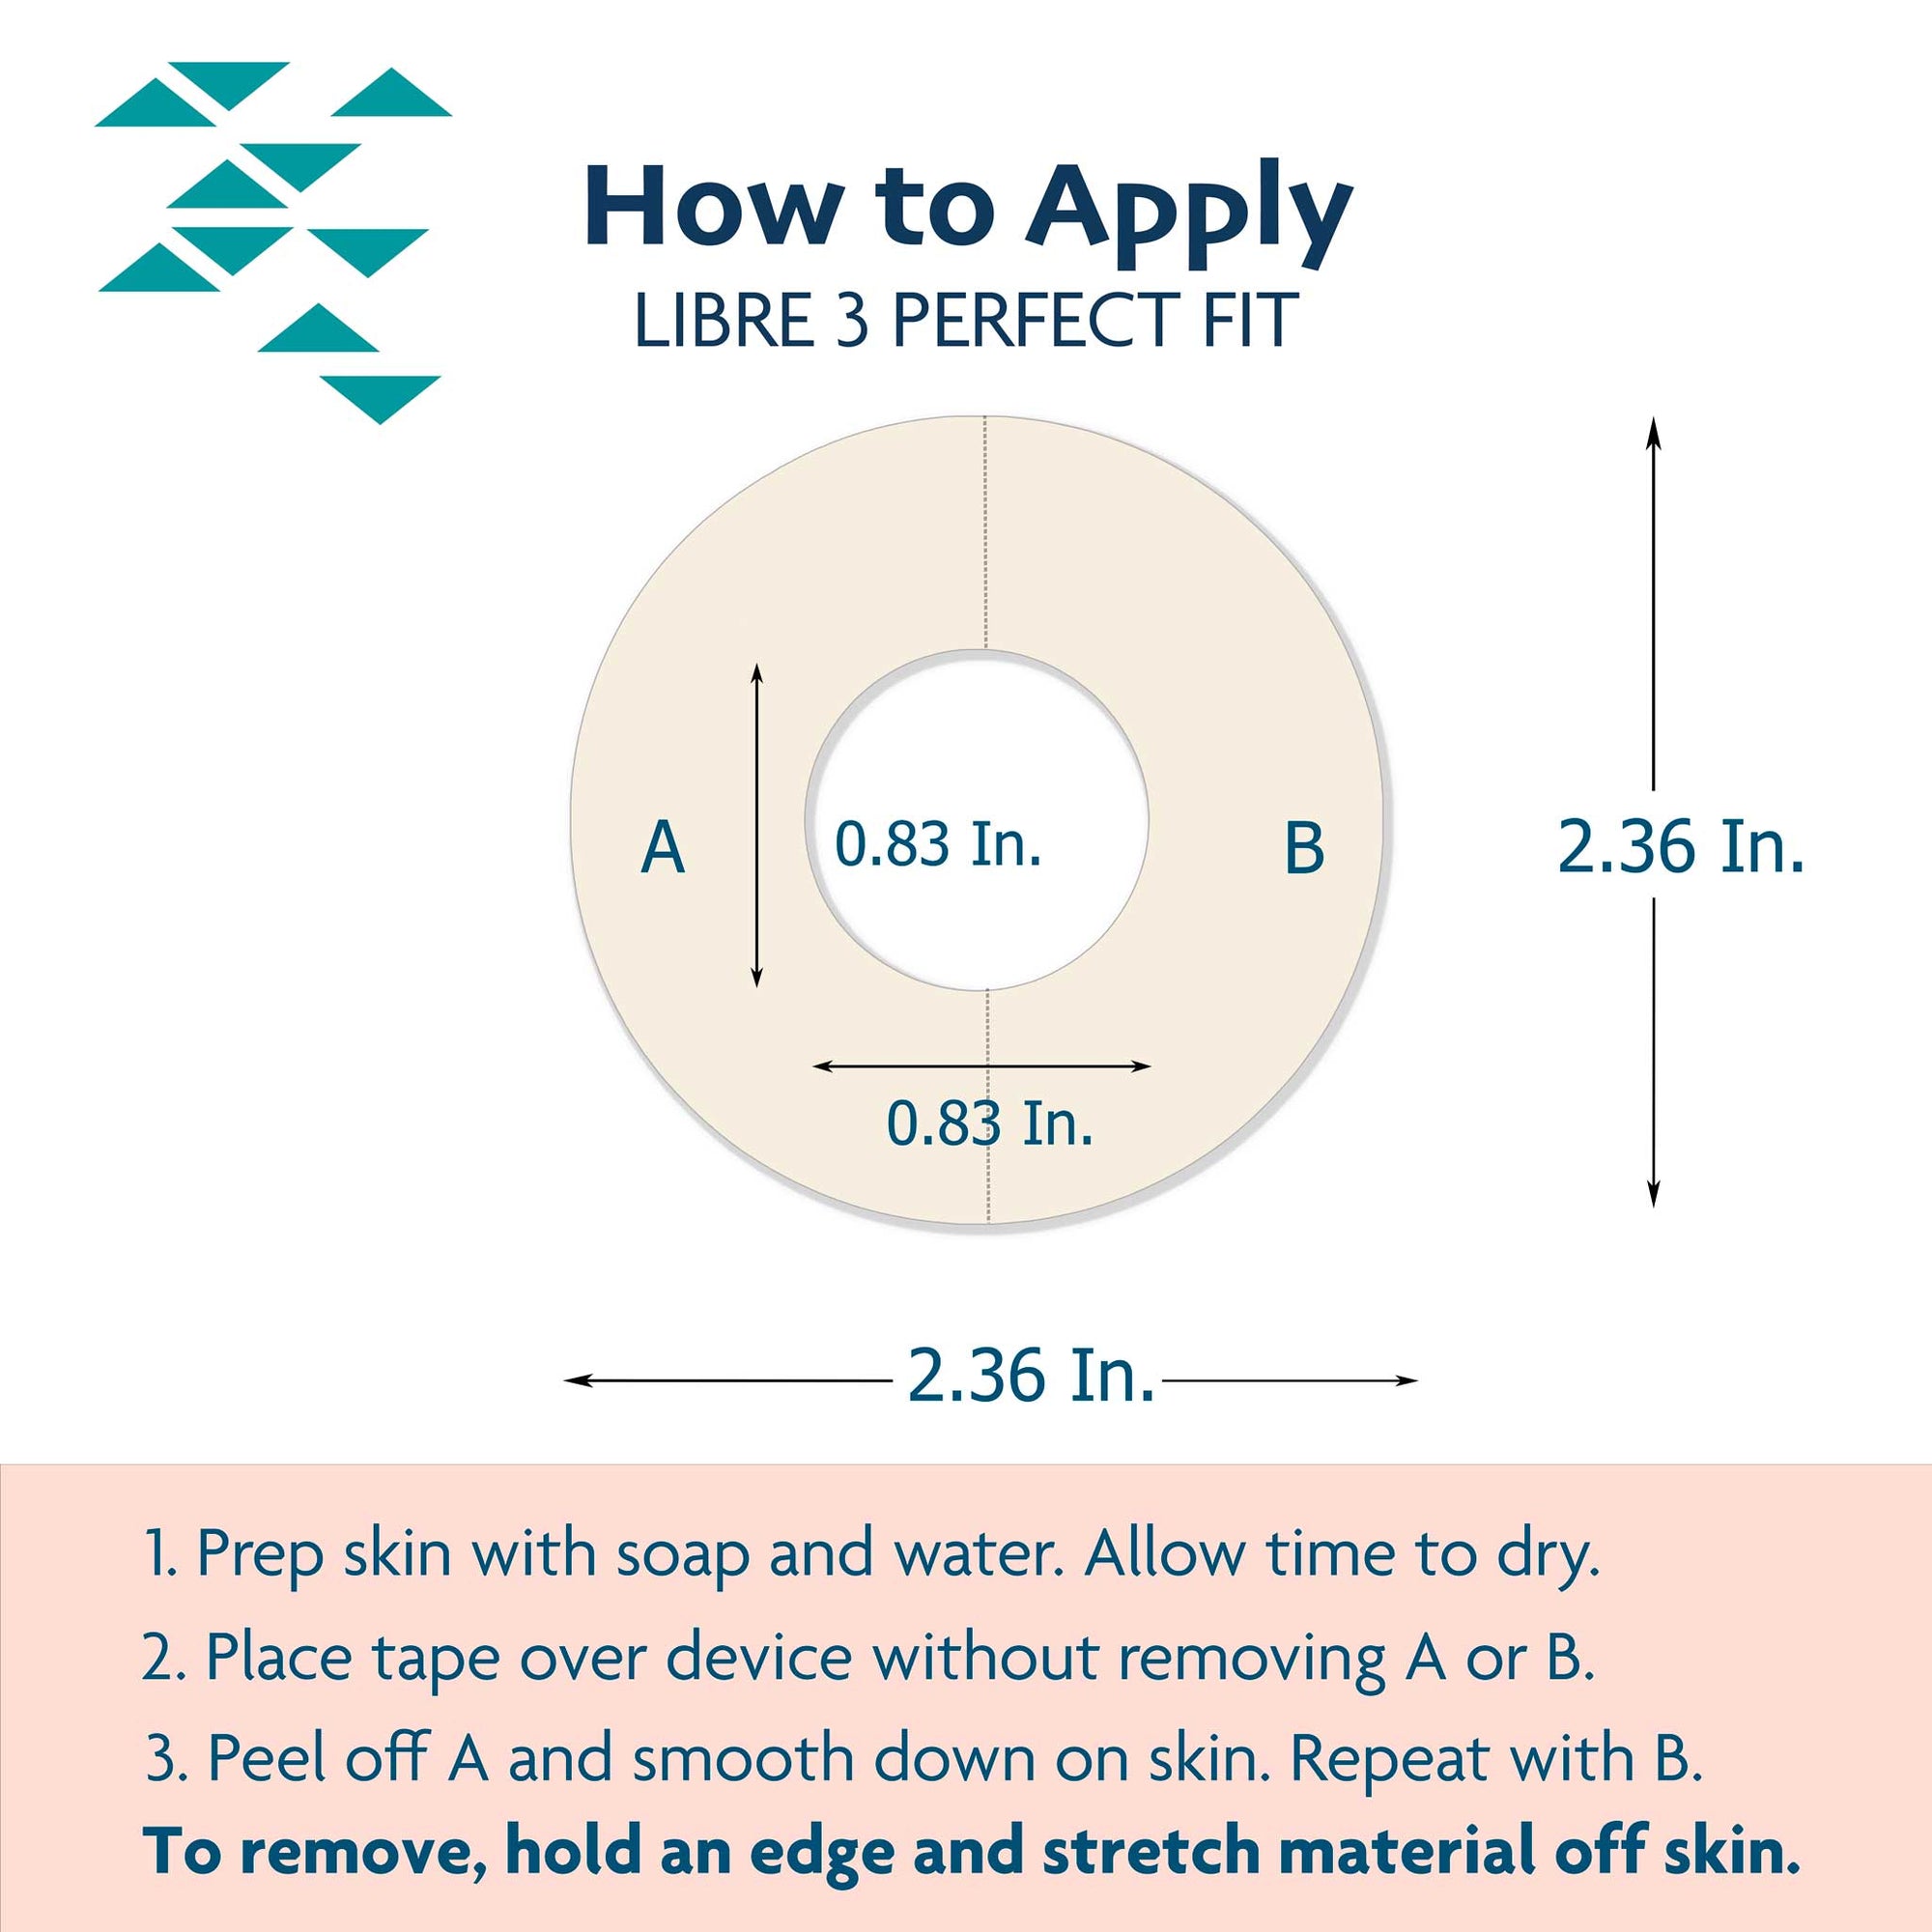 Libre 3 Perfect Fit ADhesive Tape Application Tape and Dimensions